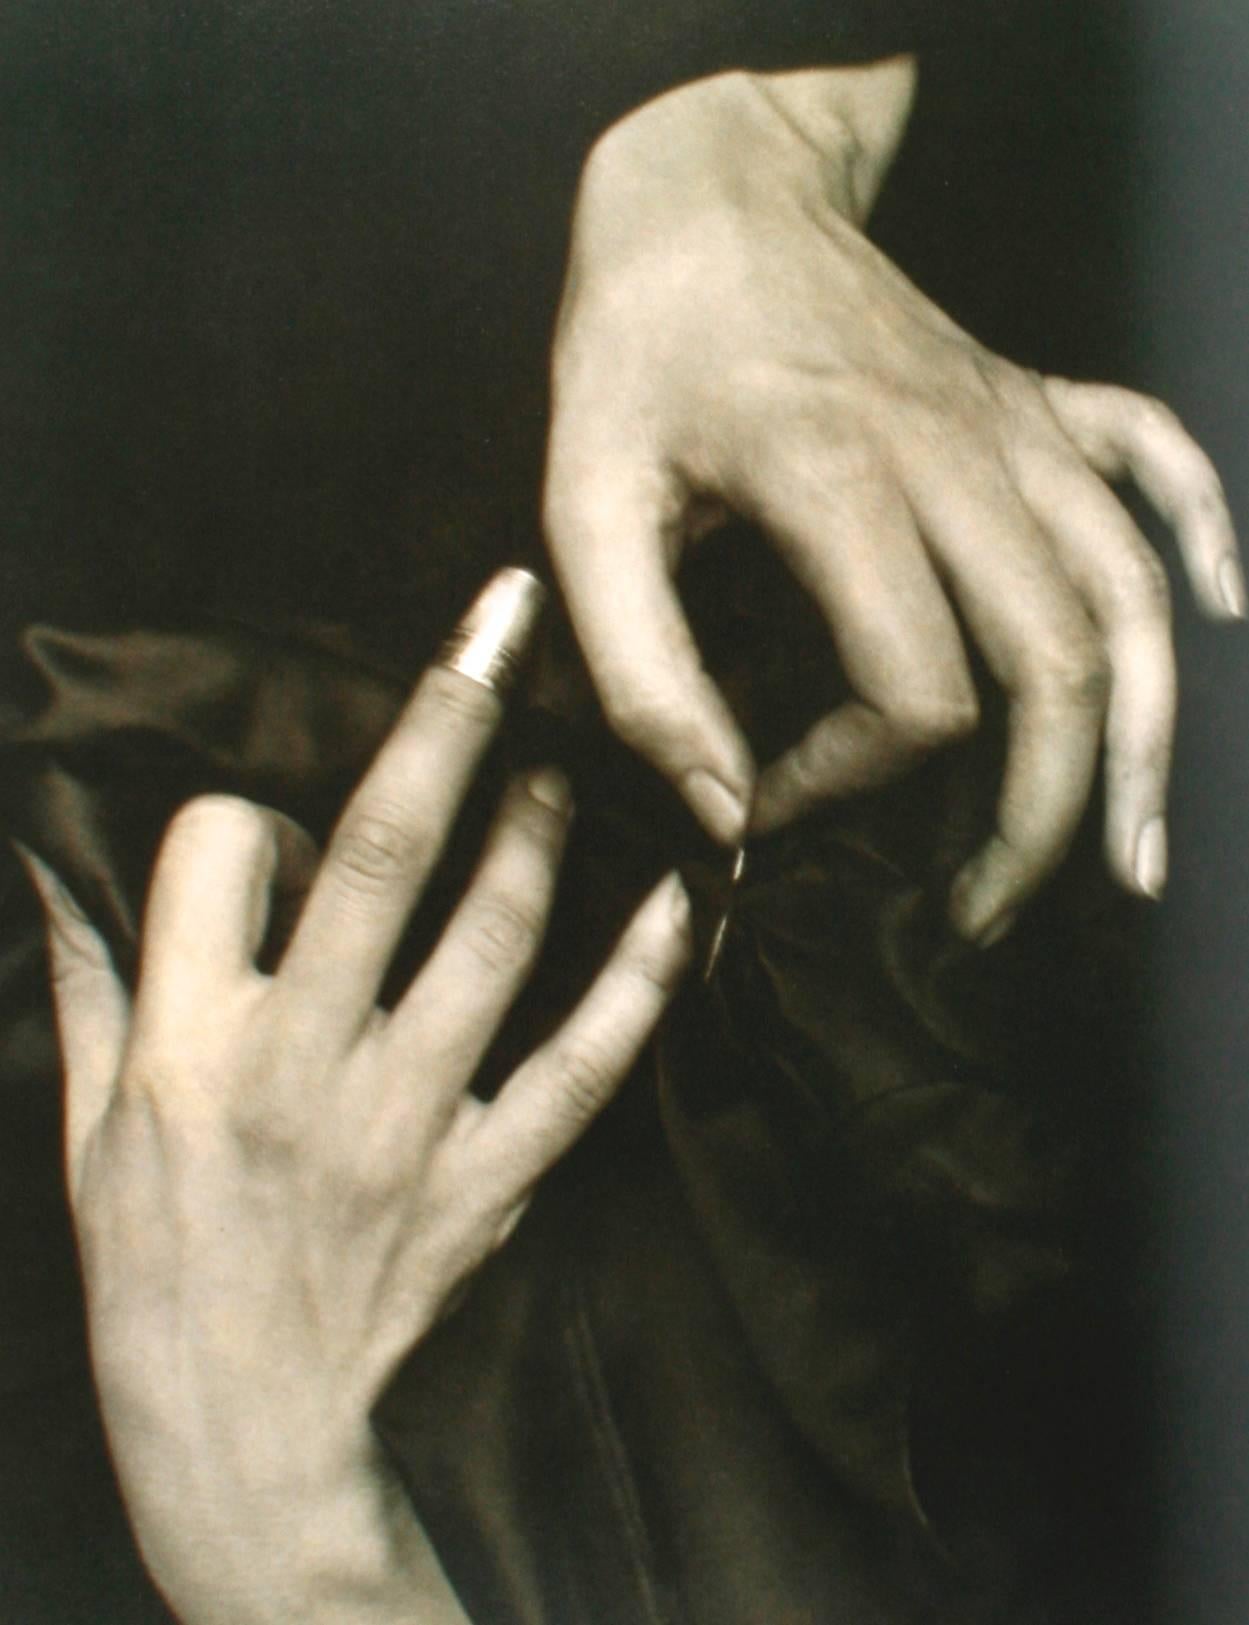 Speaking With Hands by Jennifer Blessing. Guggenheim Museum, 2004. First edition hardcover with dust jacket. Published for the exhibition of the same name at Solomon R. Guggenheim Museum, New York, June 4 - September 8, 2004. In October 1993, Henry